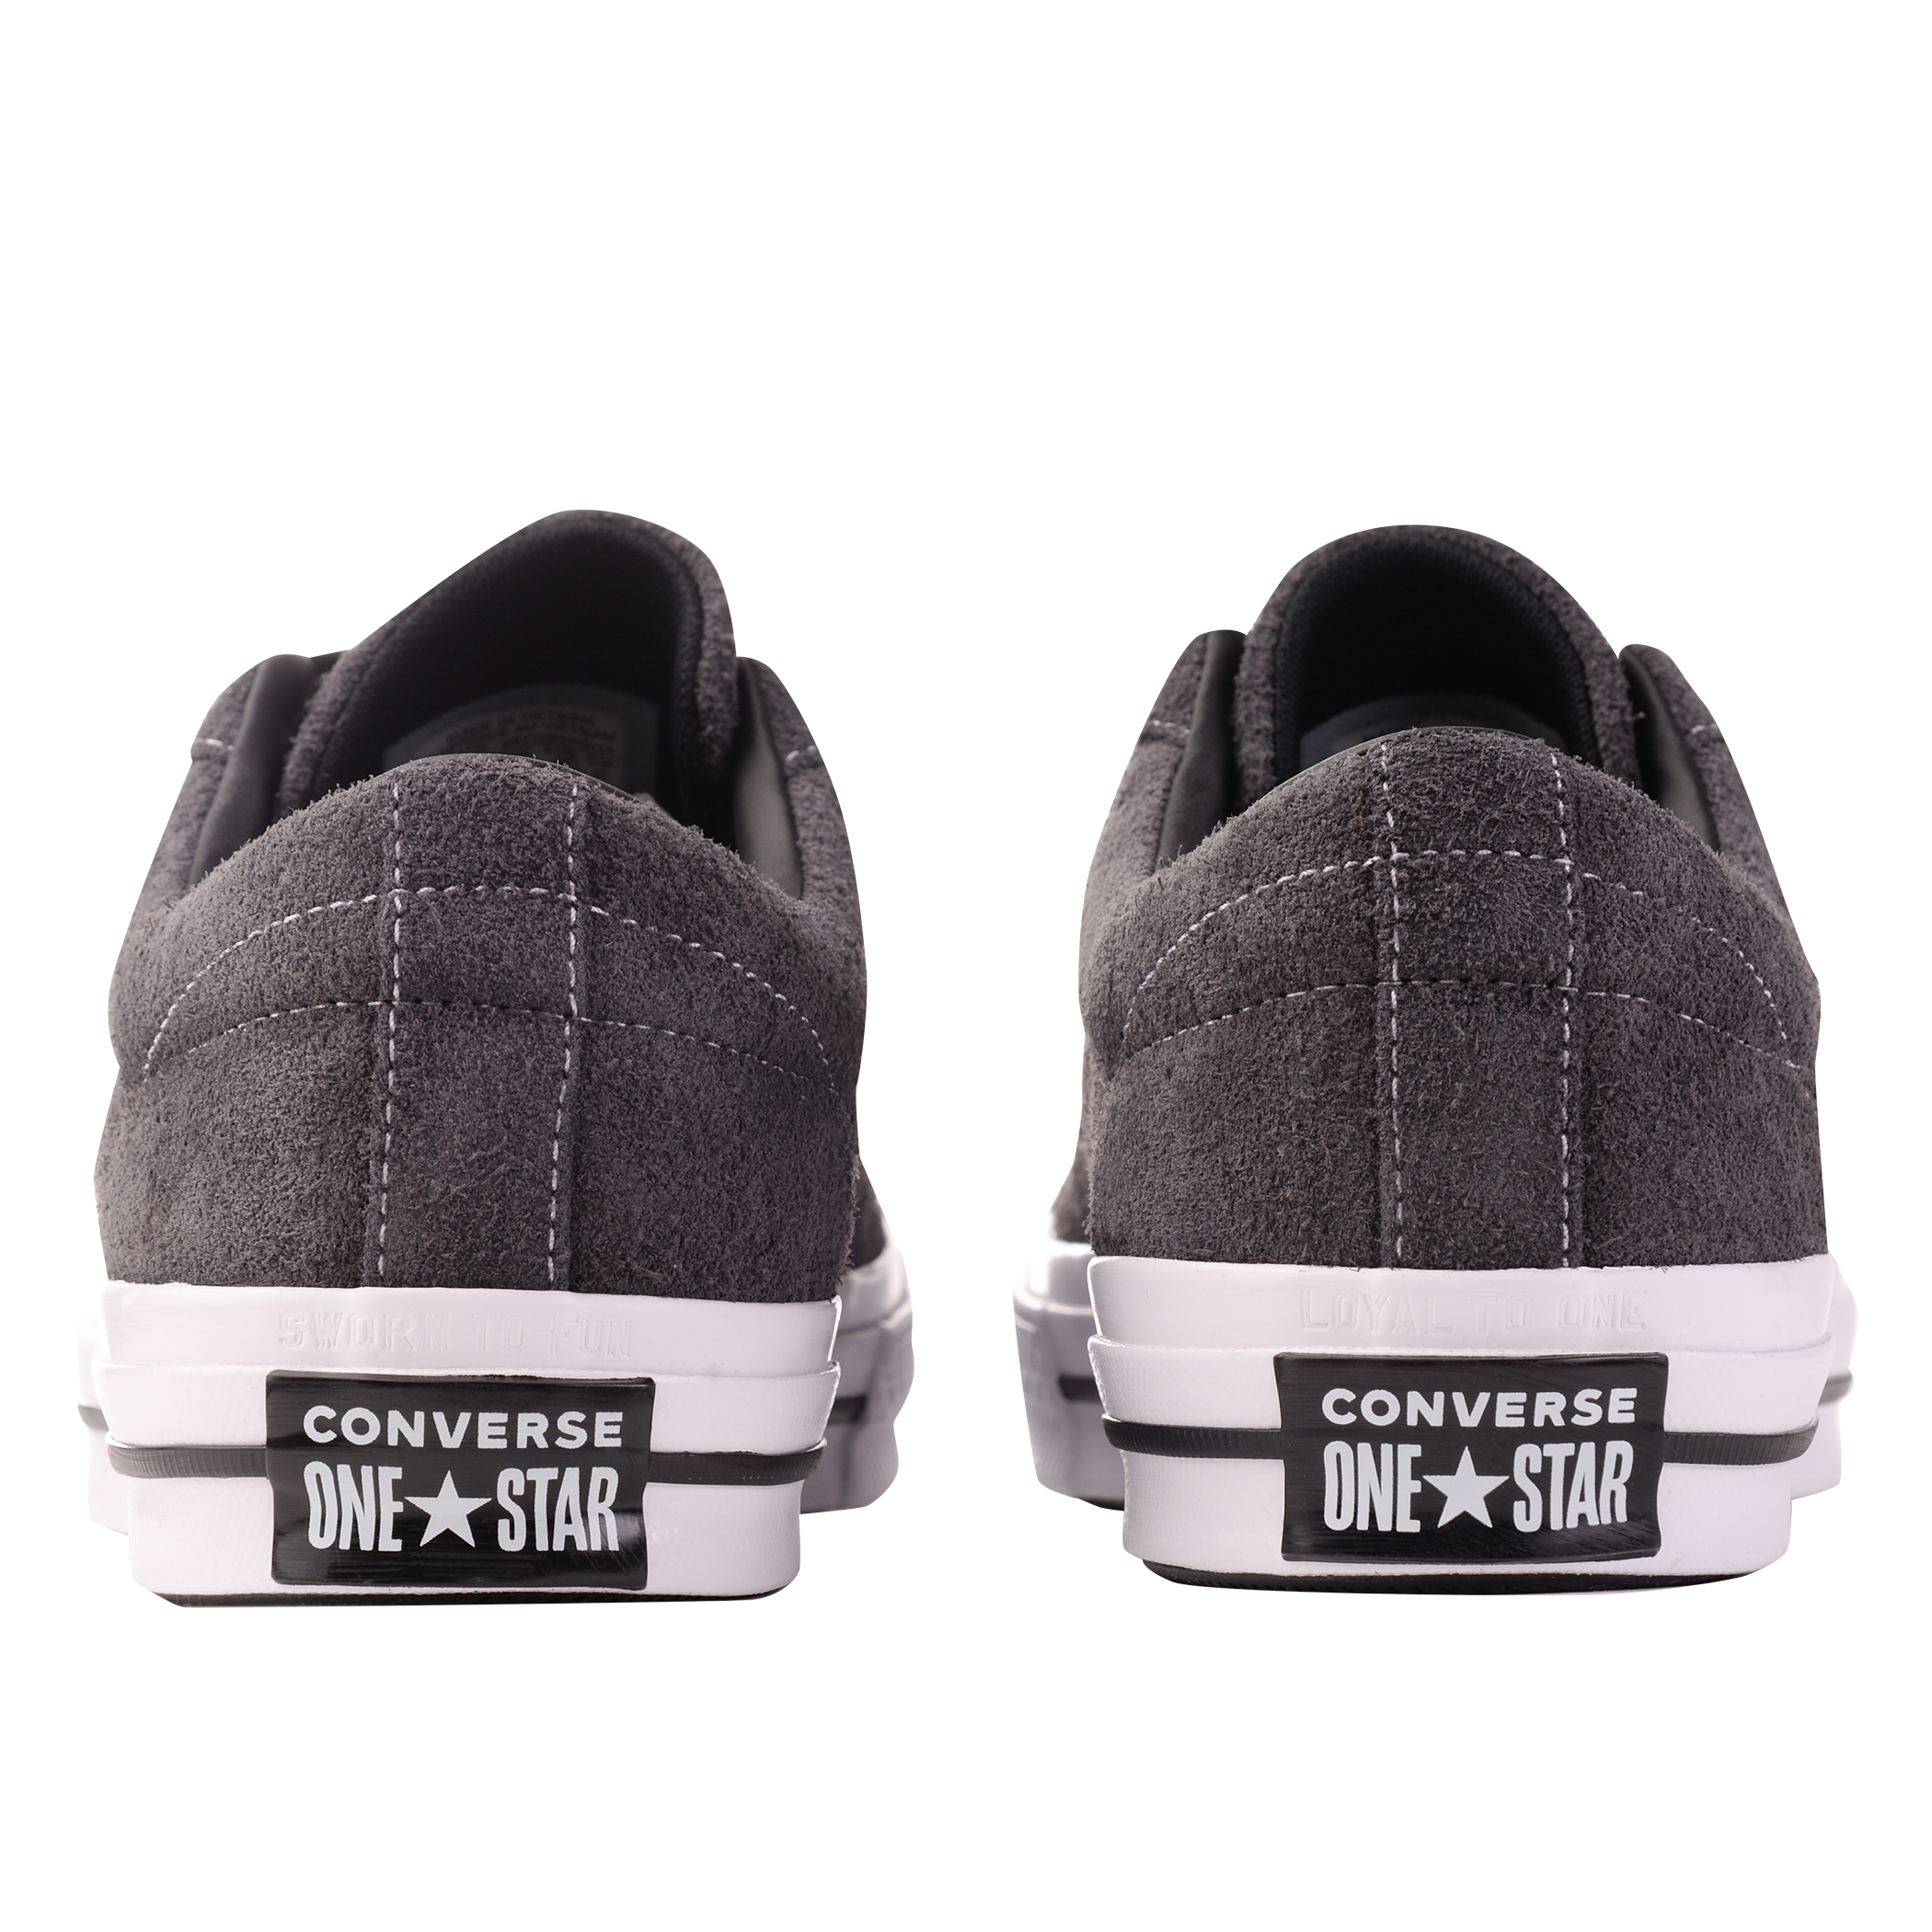 converse one star almost black